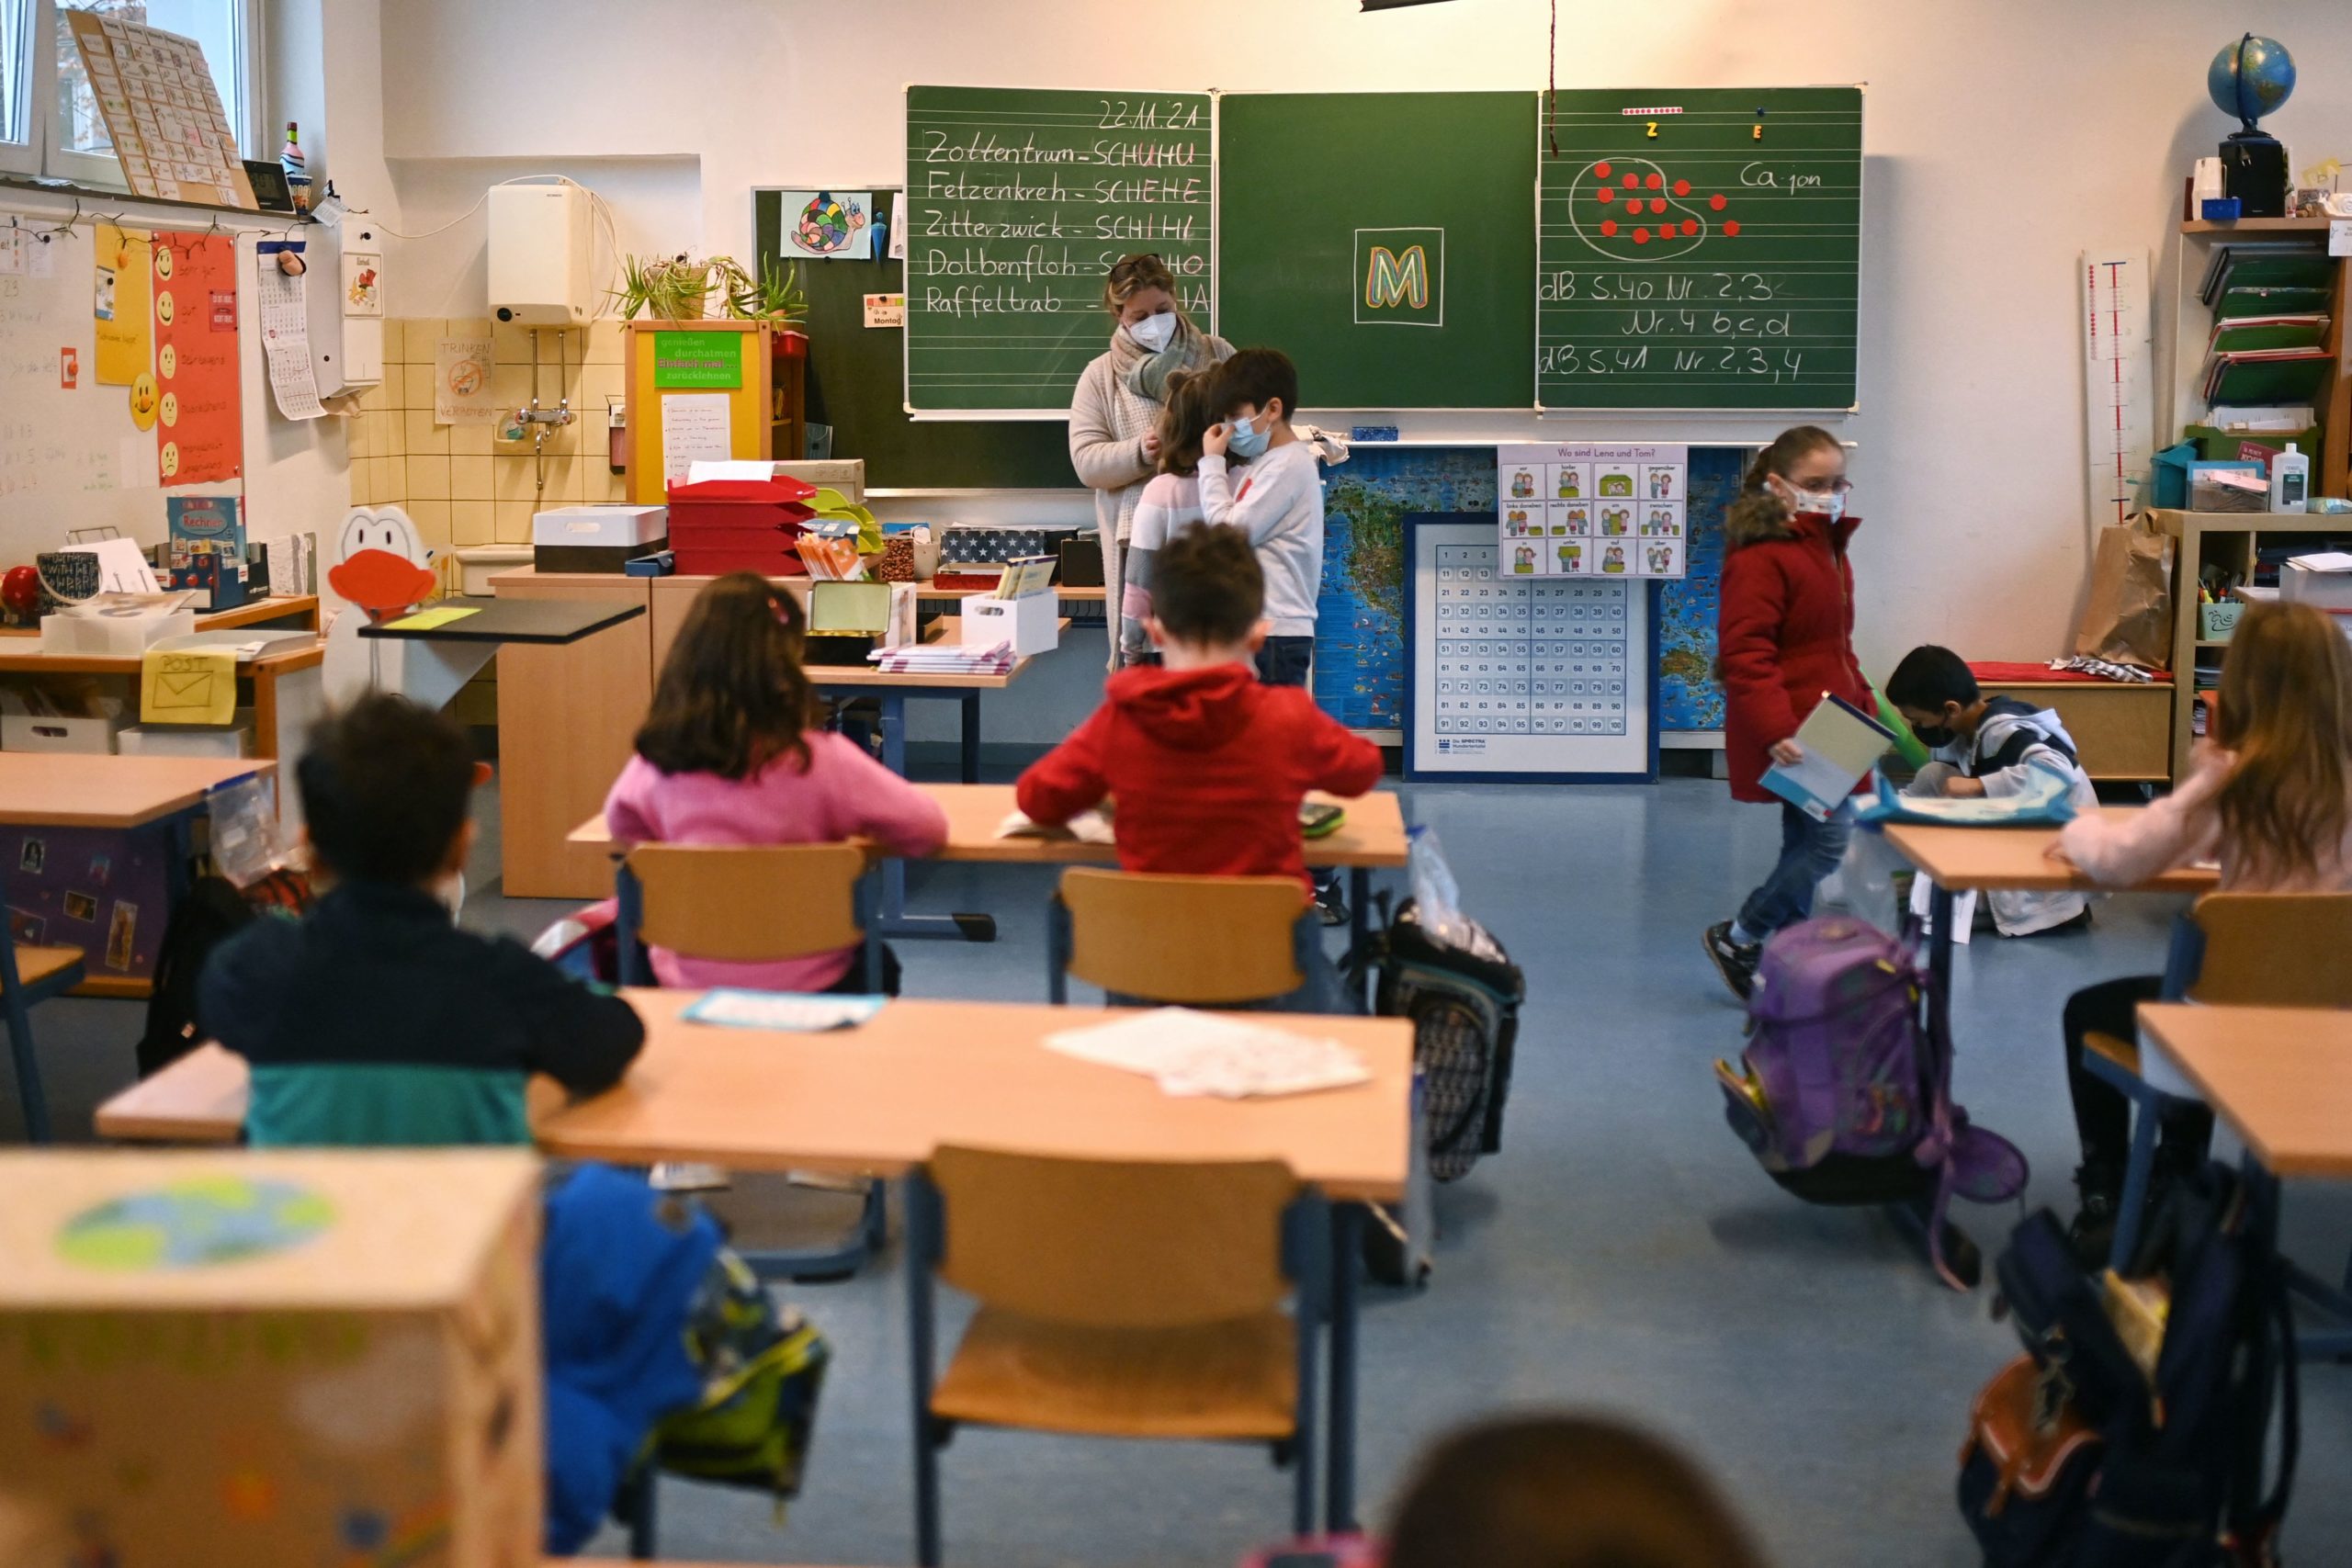 Children of a school class attend a lesson in their classroom at the Petri primary school in Dortmund, western Germany, on November 23, 2021 amid the novel coronavirus / COVID-19 pandemic. (Photo by INA FASSBENDER/AFP via Getty Images)